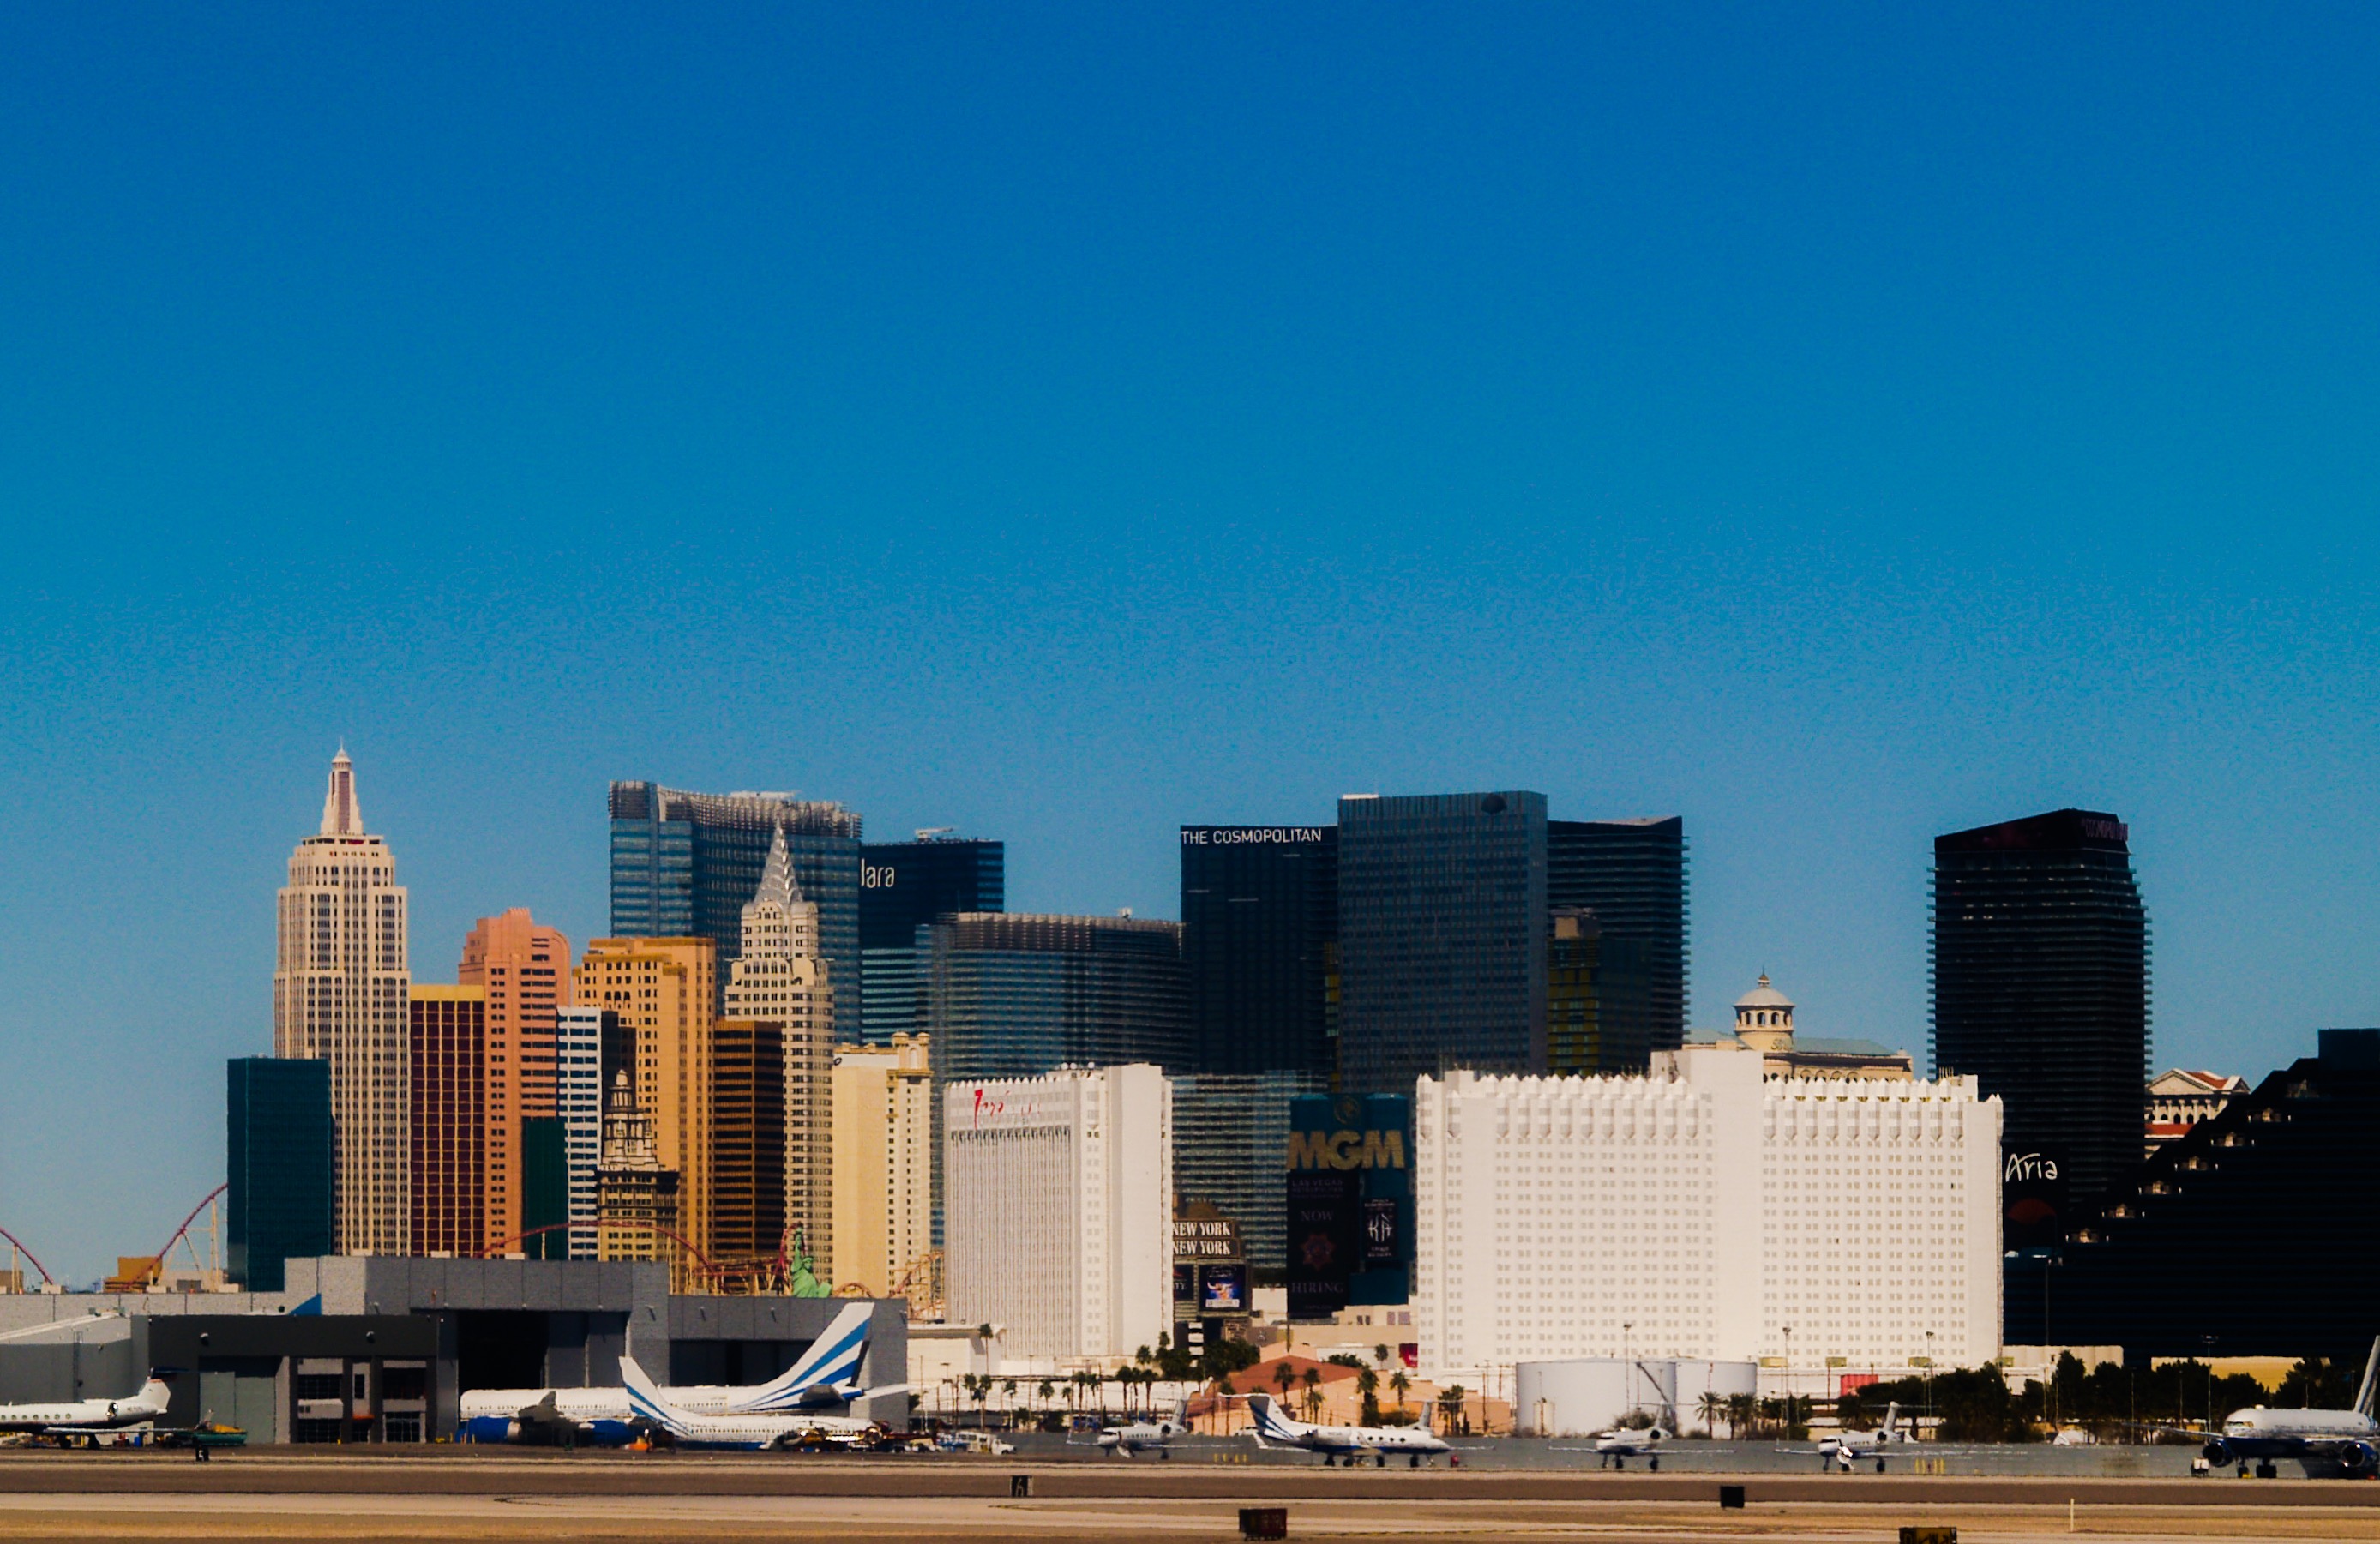 A crisp and cloudless, blue sky overlooking the wonderful Las Vegas skyline, photo was taken leaving the airport from the plane window.